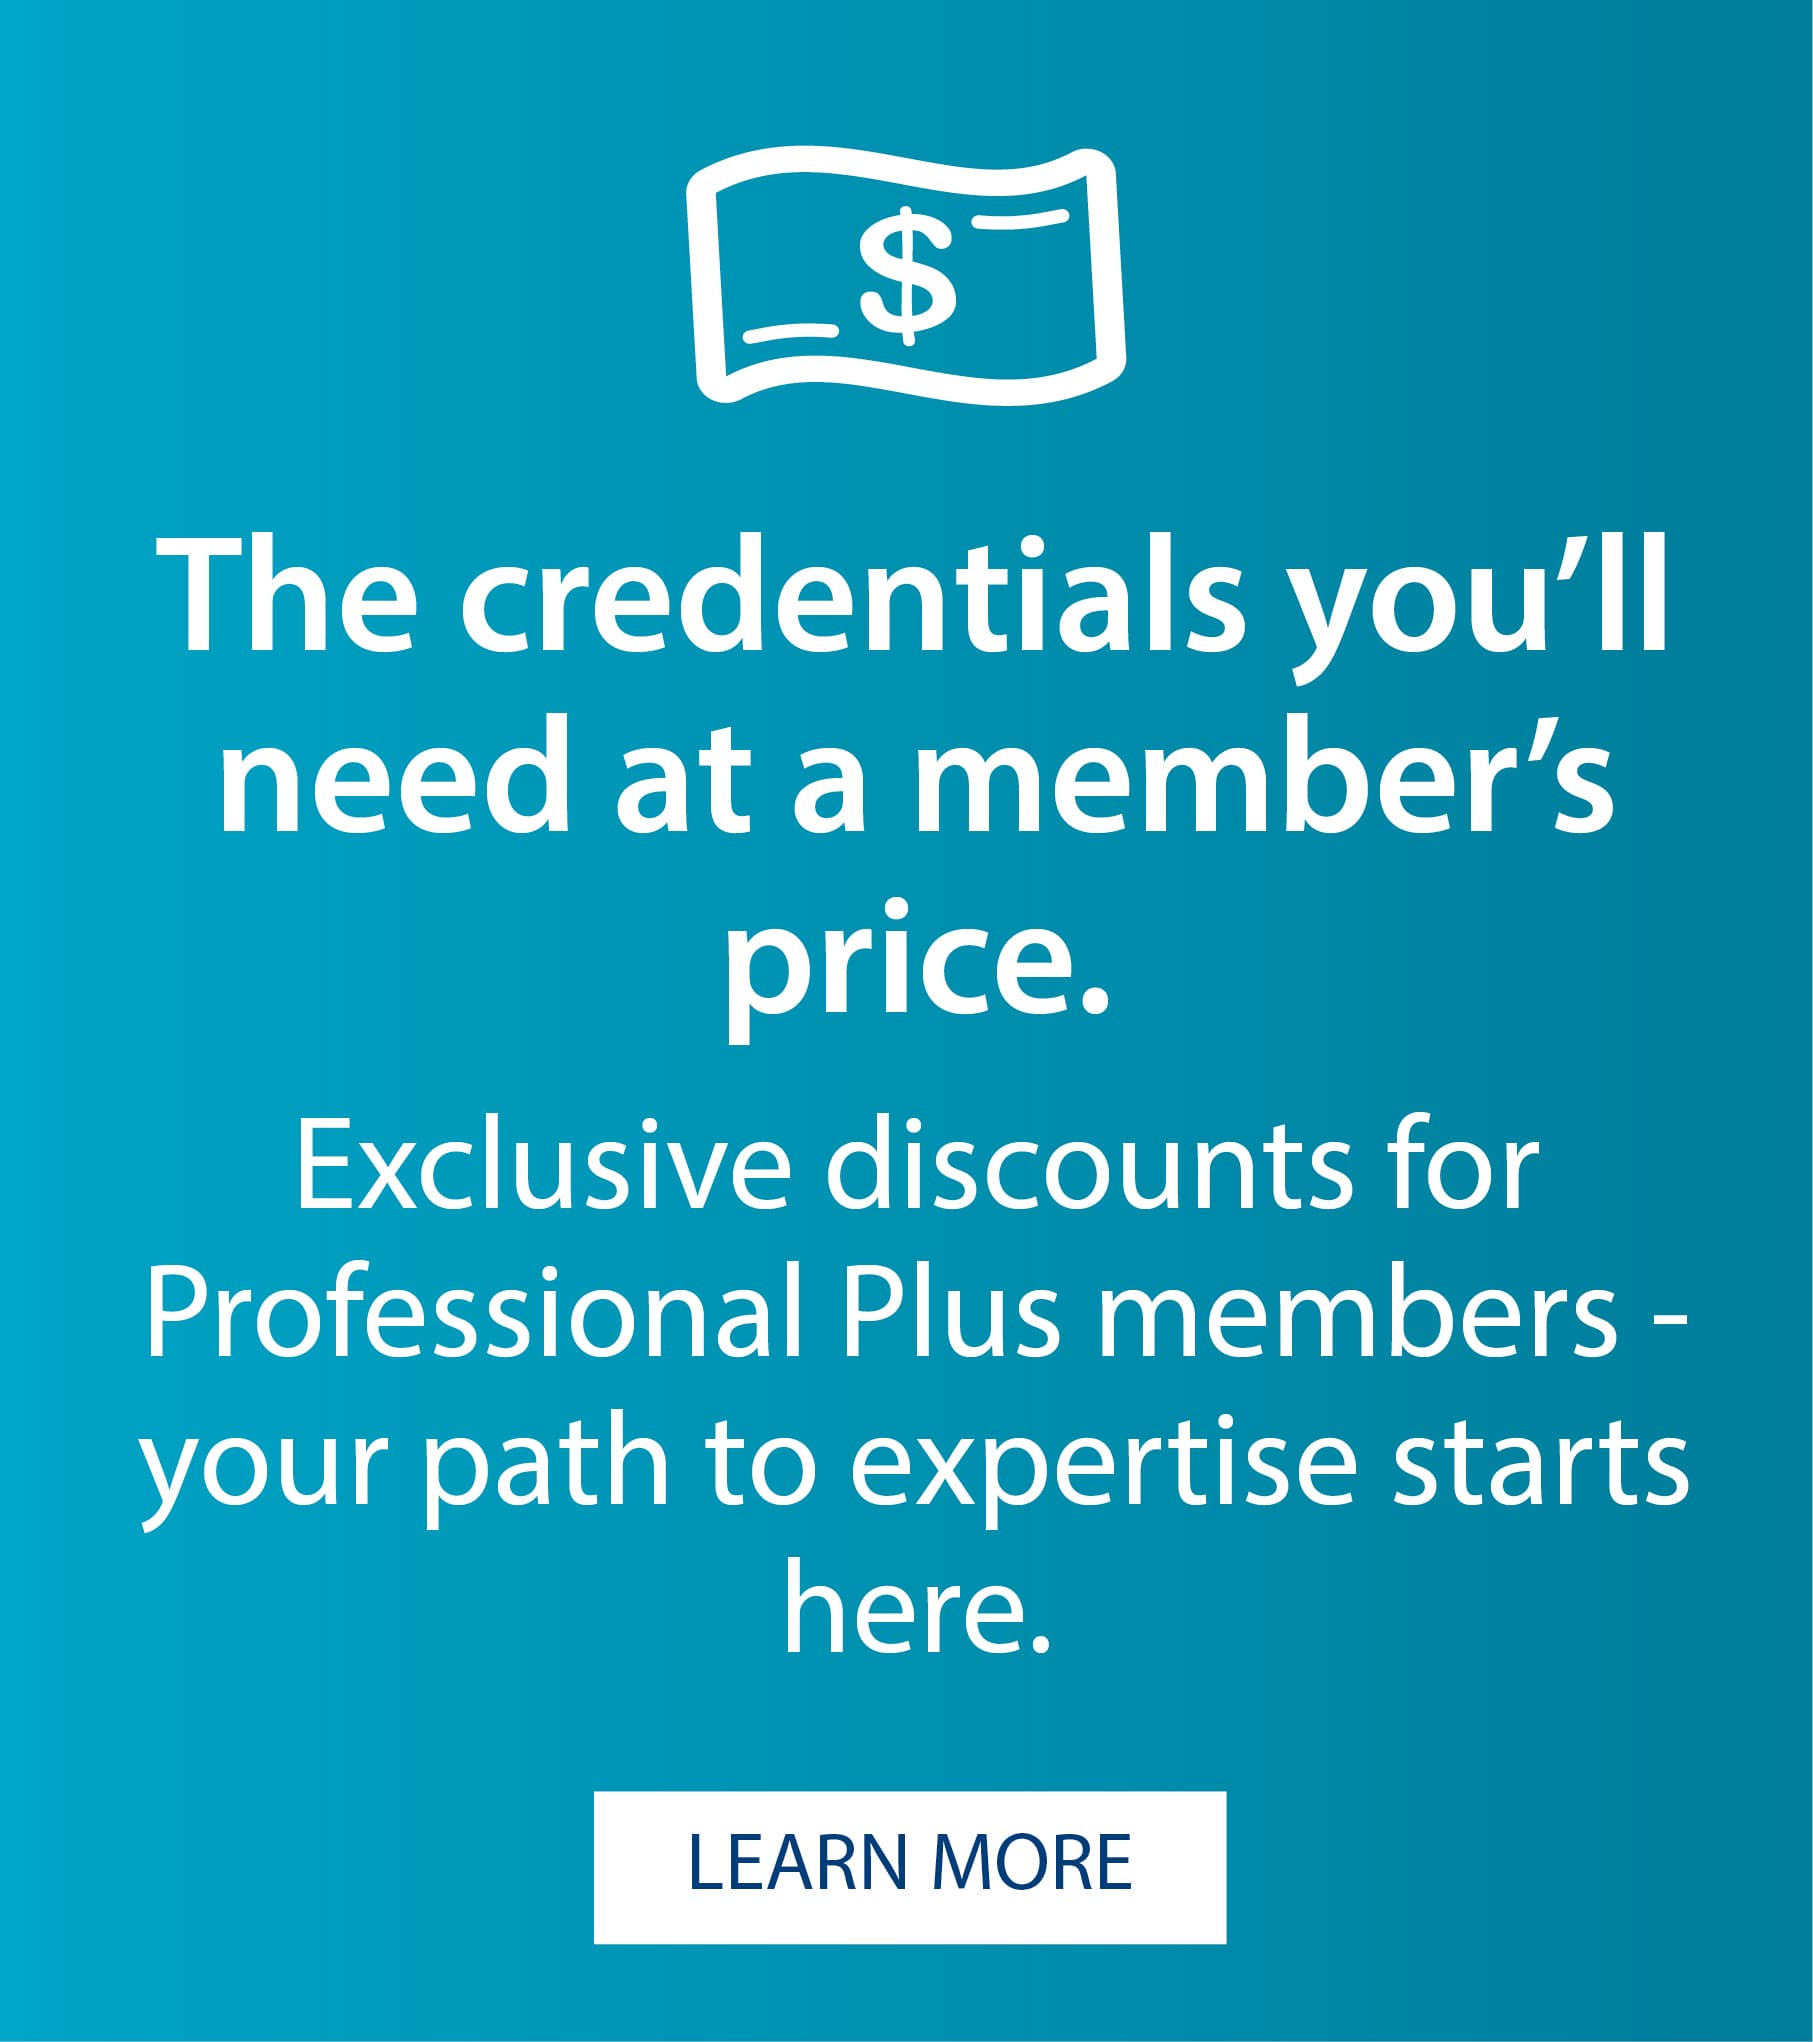 Link to Credential Pharmacist discounts